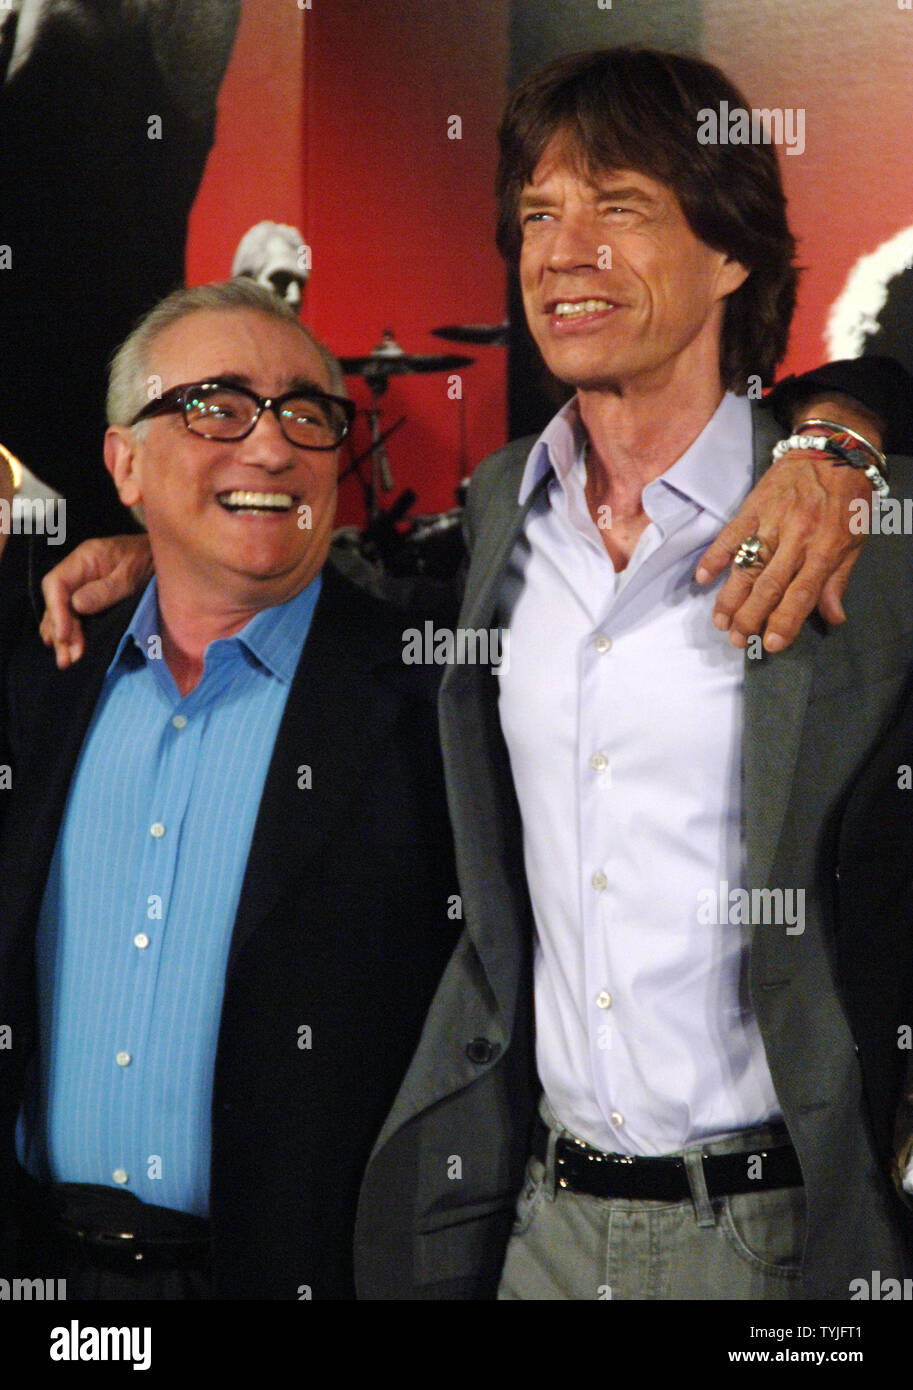 The Rolling Stones lead singer Mick Jagger and film director Martin Scorsese  (L) chat during the pre press conference photo op for the Martin Scorsese  film documentary on the Stones "Shine A